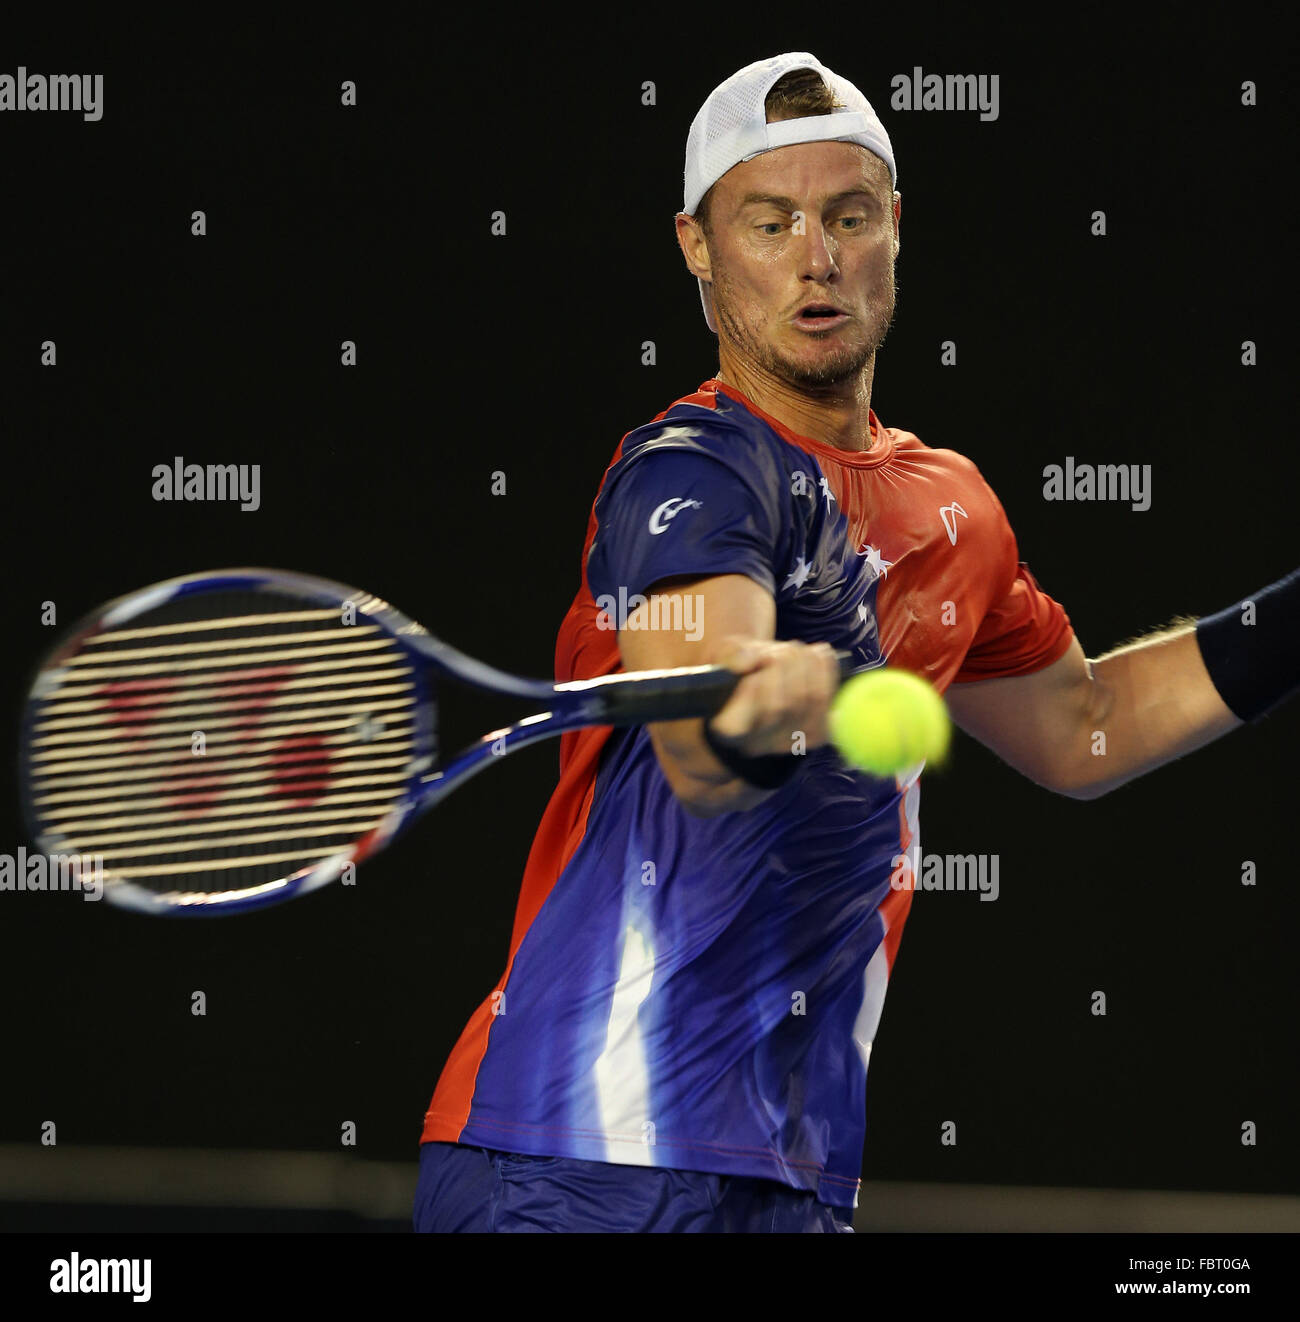 Melbourne, Australia. 19th Jan, 2016. Australia's Lleyton Hewitt competes against his compatriot James Duckworth during the first round match of men's singles at the Australian Open Tennis Championships in Melbourne, Australia, Jan. 19, 2016. Credit:  Bi Mingming/Xinhua/Alamy Live News Stock Photo